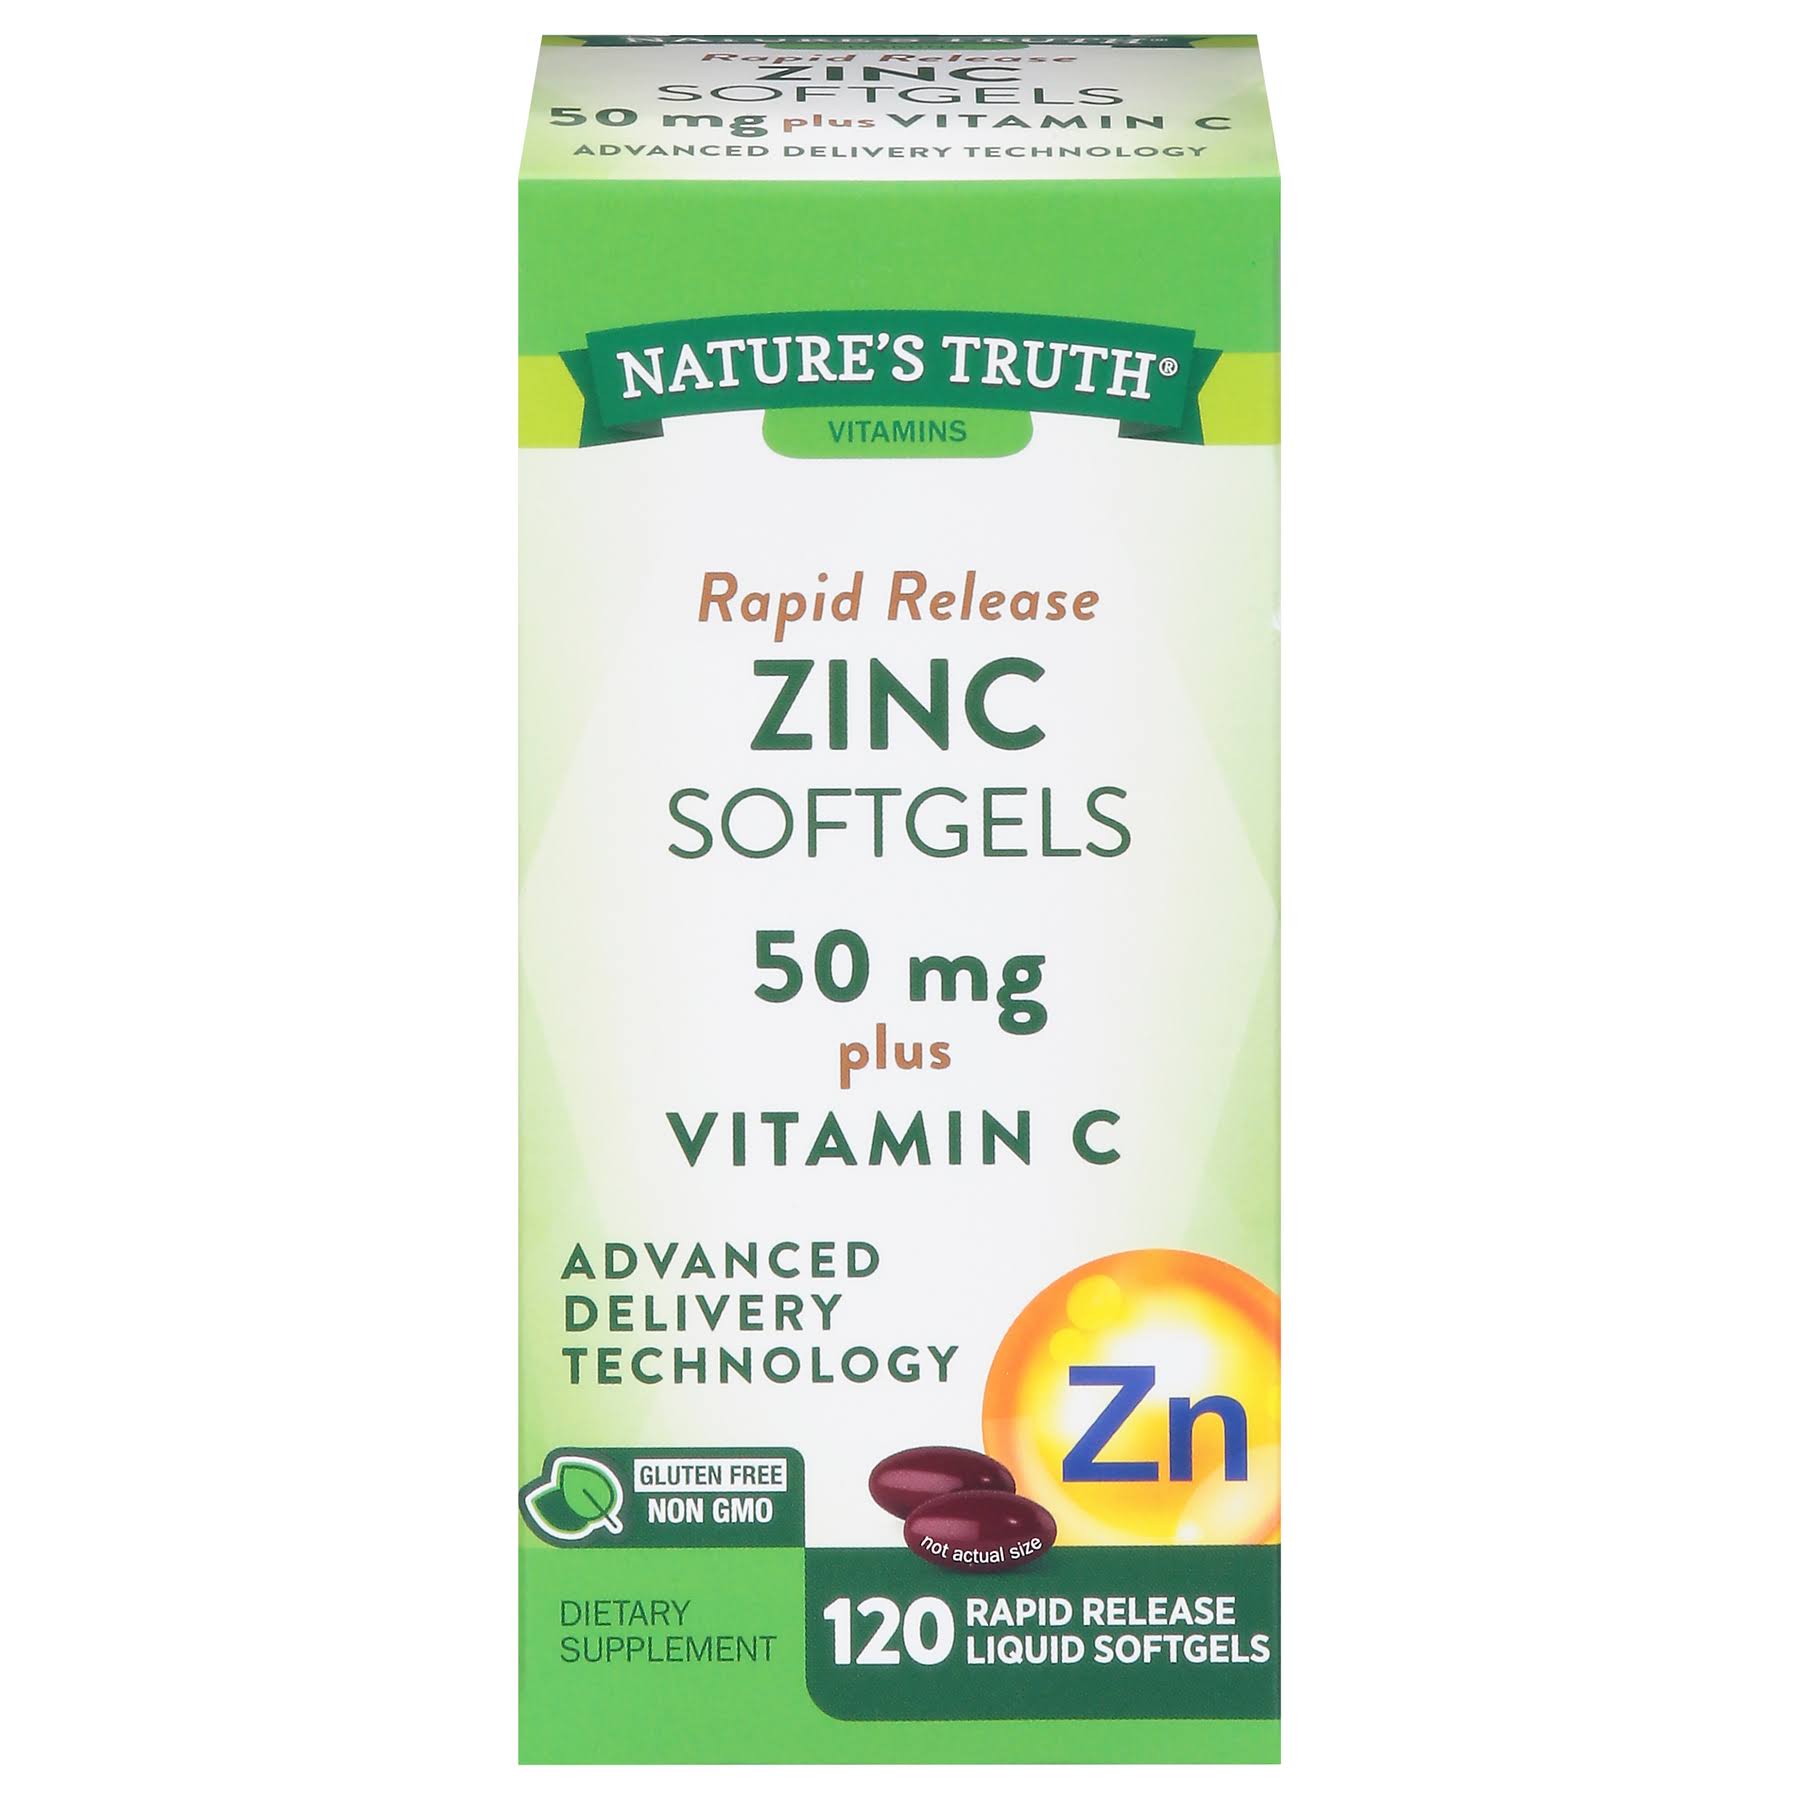 Nature's Truth Rapid Release Zinc Softgels 50 mg (120 ct) | Dierbergs